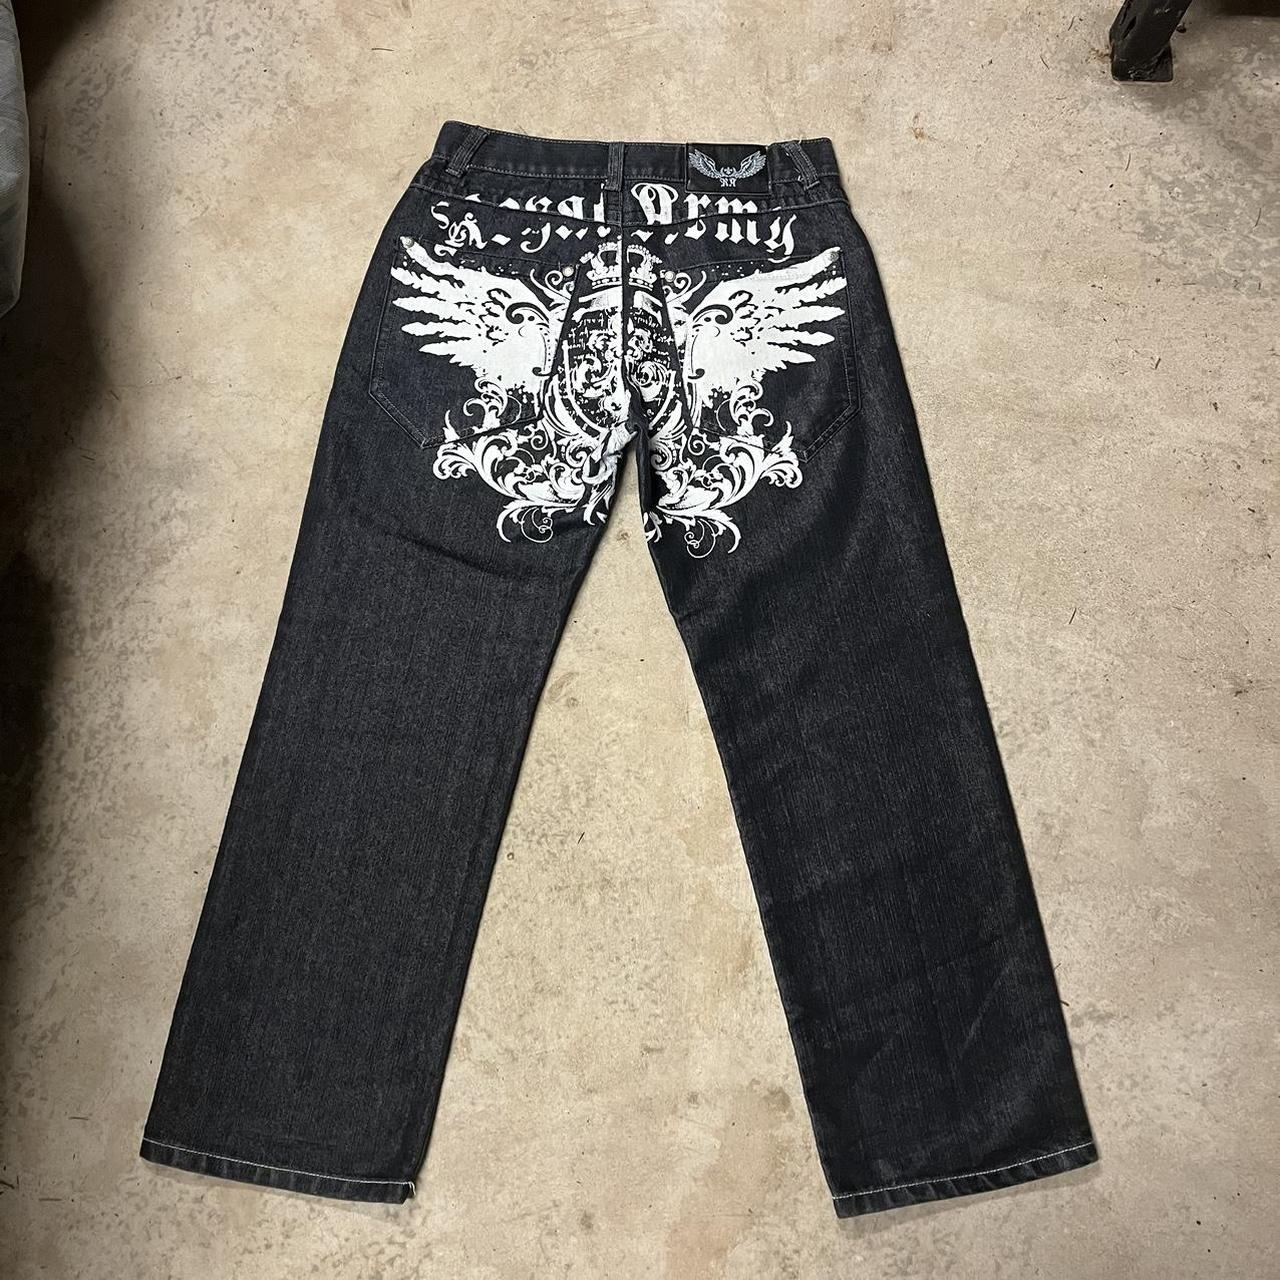 Affliction cyber y2k type jeans crazy fit and... - Depop